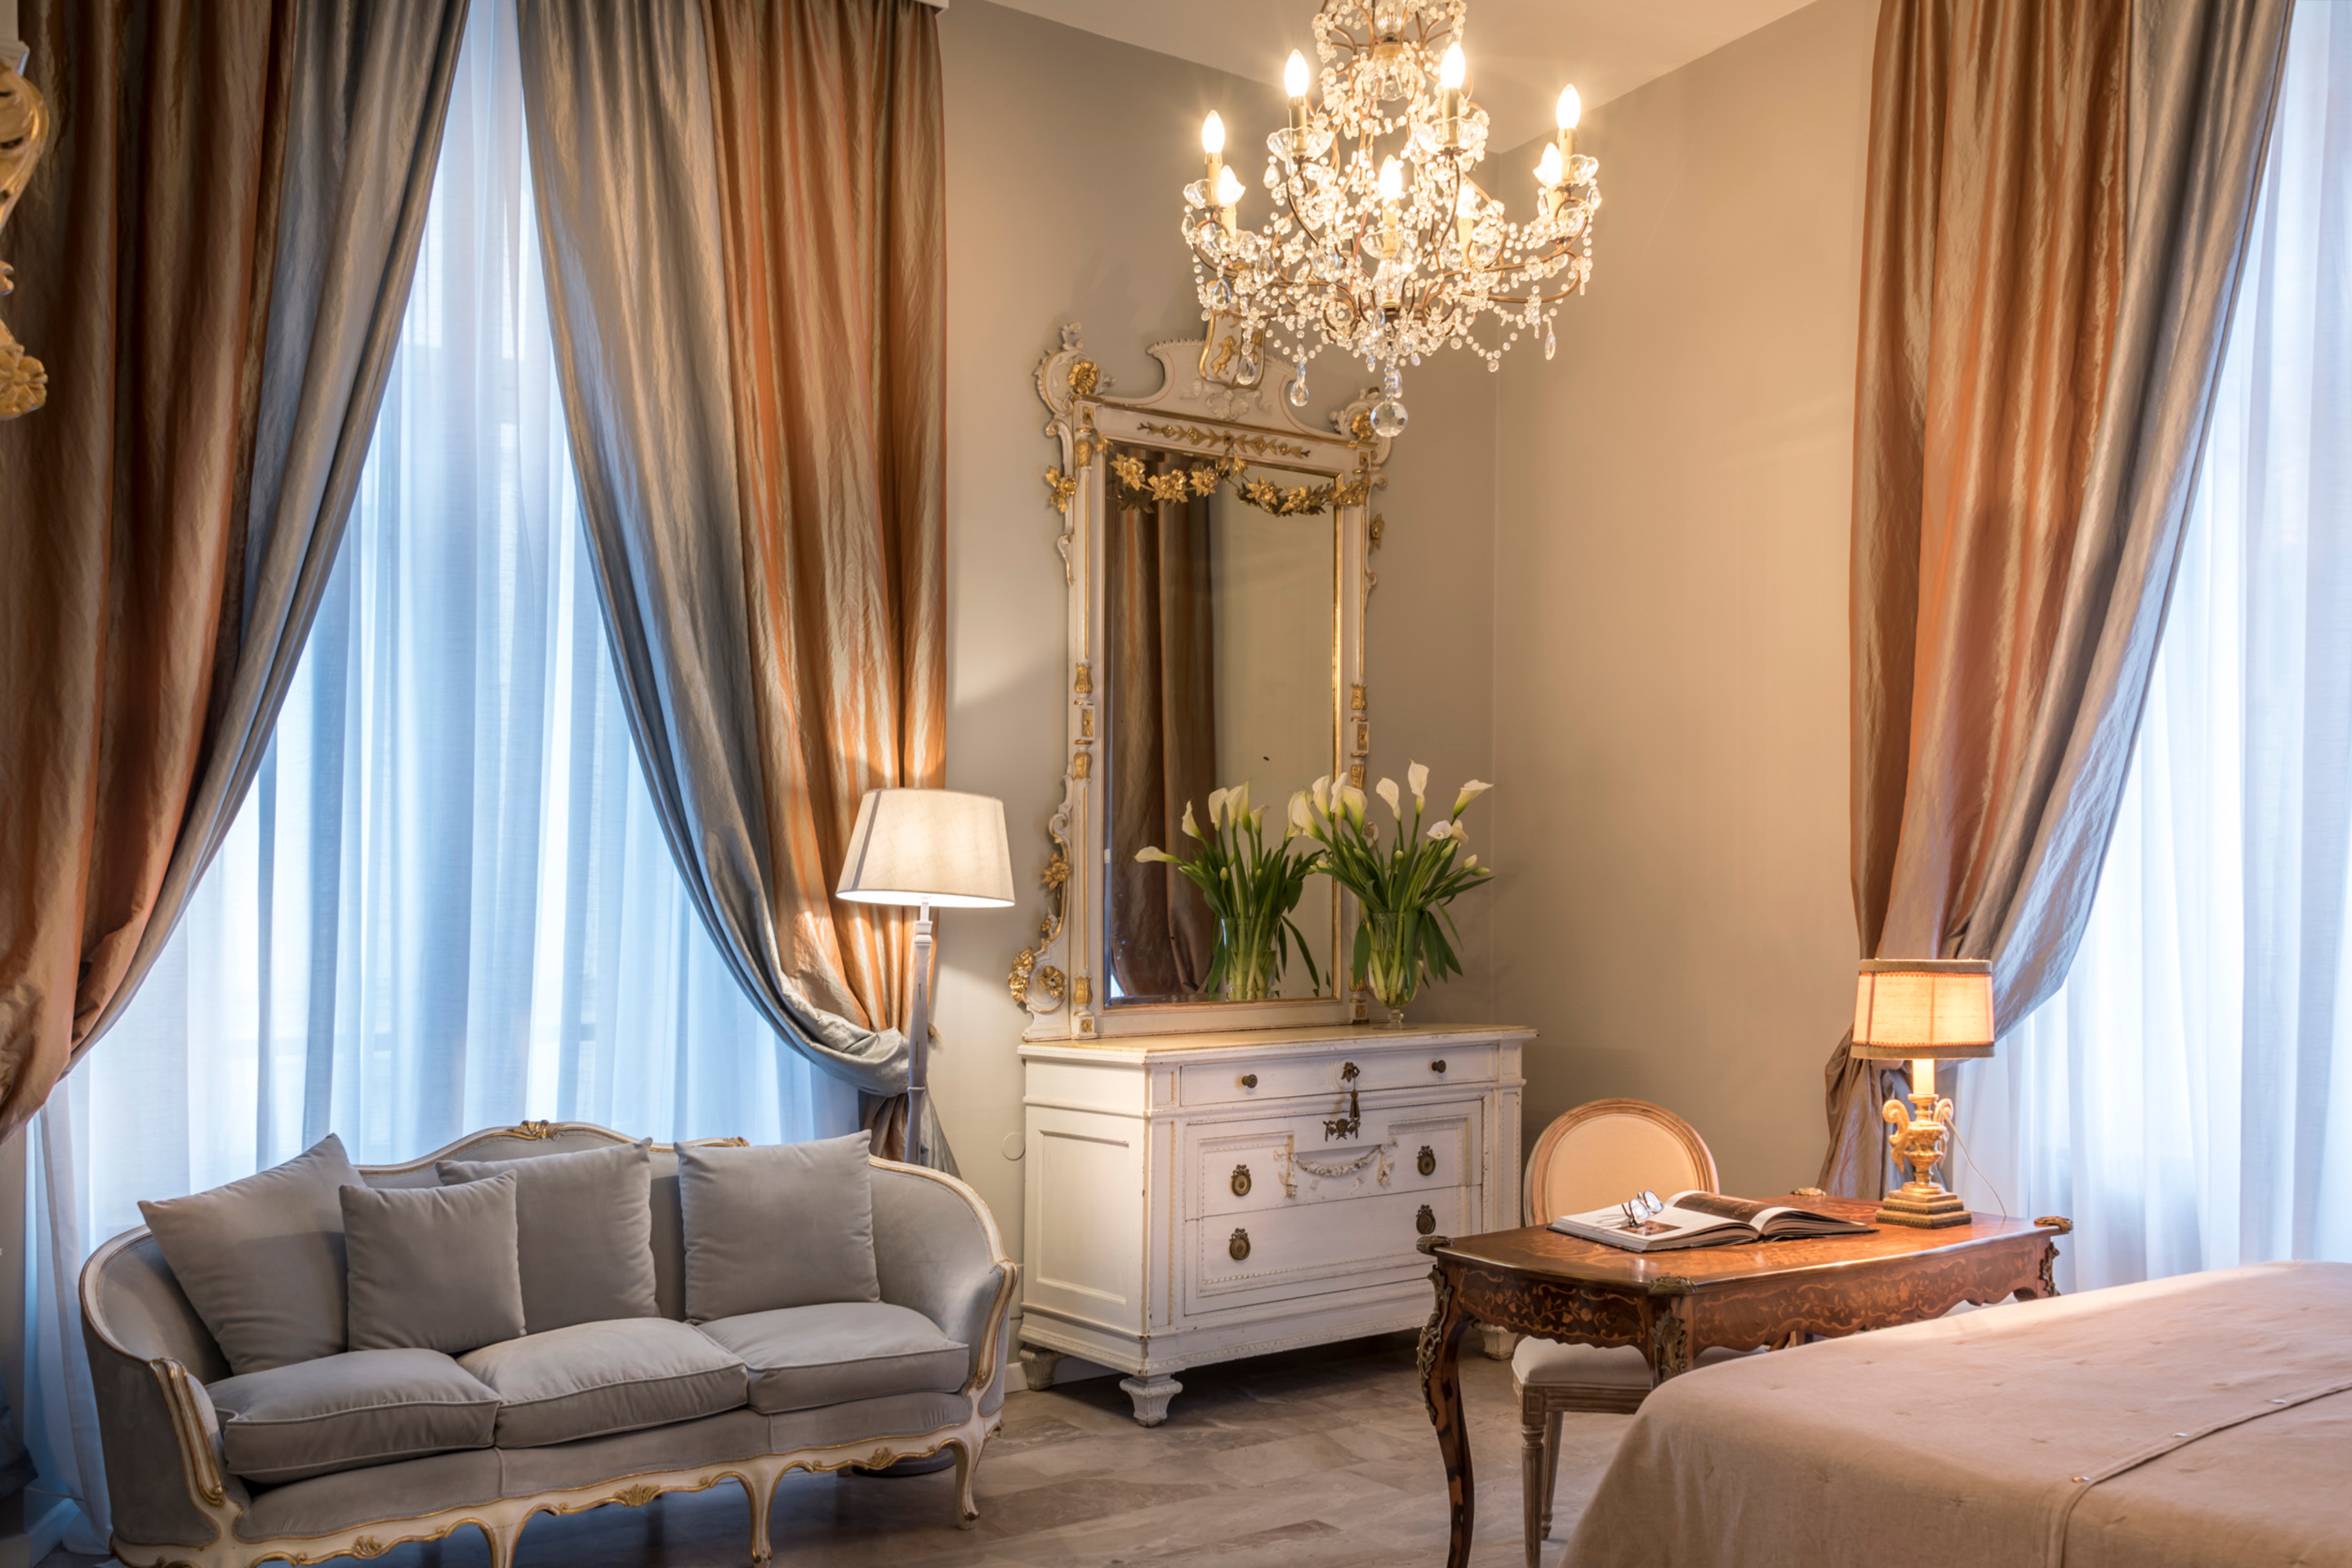 https://www.in-lombardia.it/sites/default/files/accomodation/gallery/101742/41860/arnaboldi_palace_suite_2_-_particolare.jpg